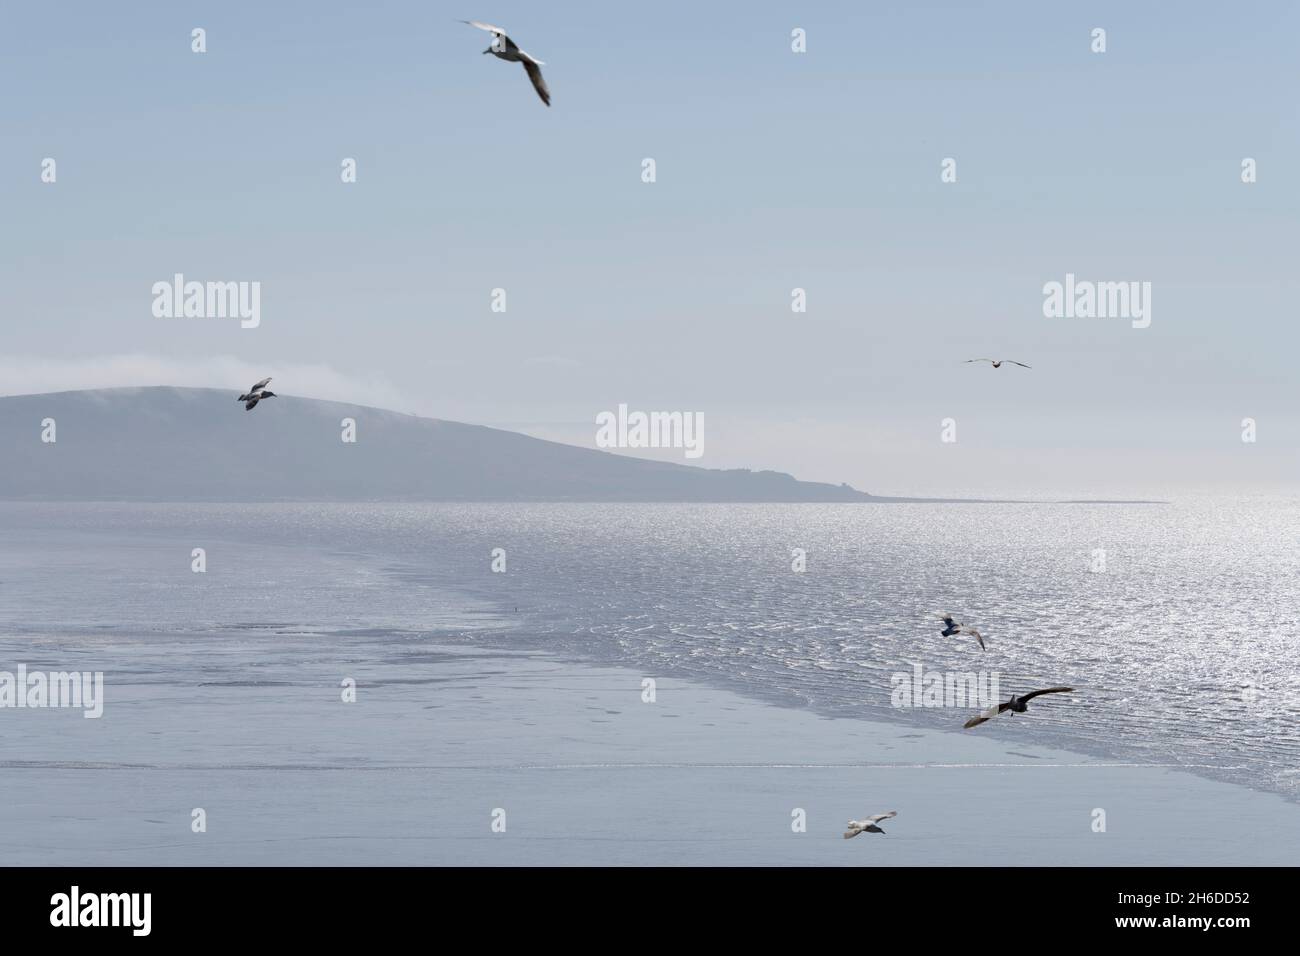 Brean Down, Somerset, 2018. General view looking south across a misty Weston Bay towards the headland, with gulls flying in the foreground. Stock Photo